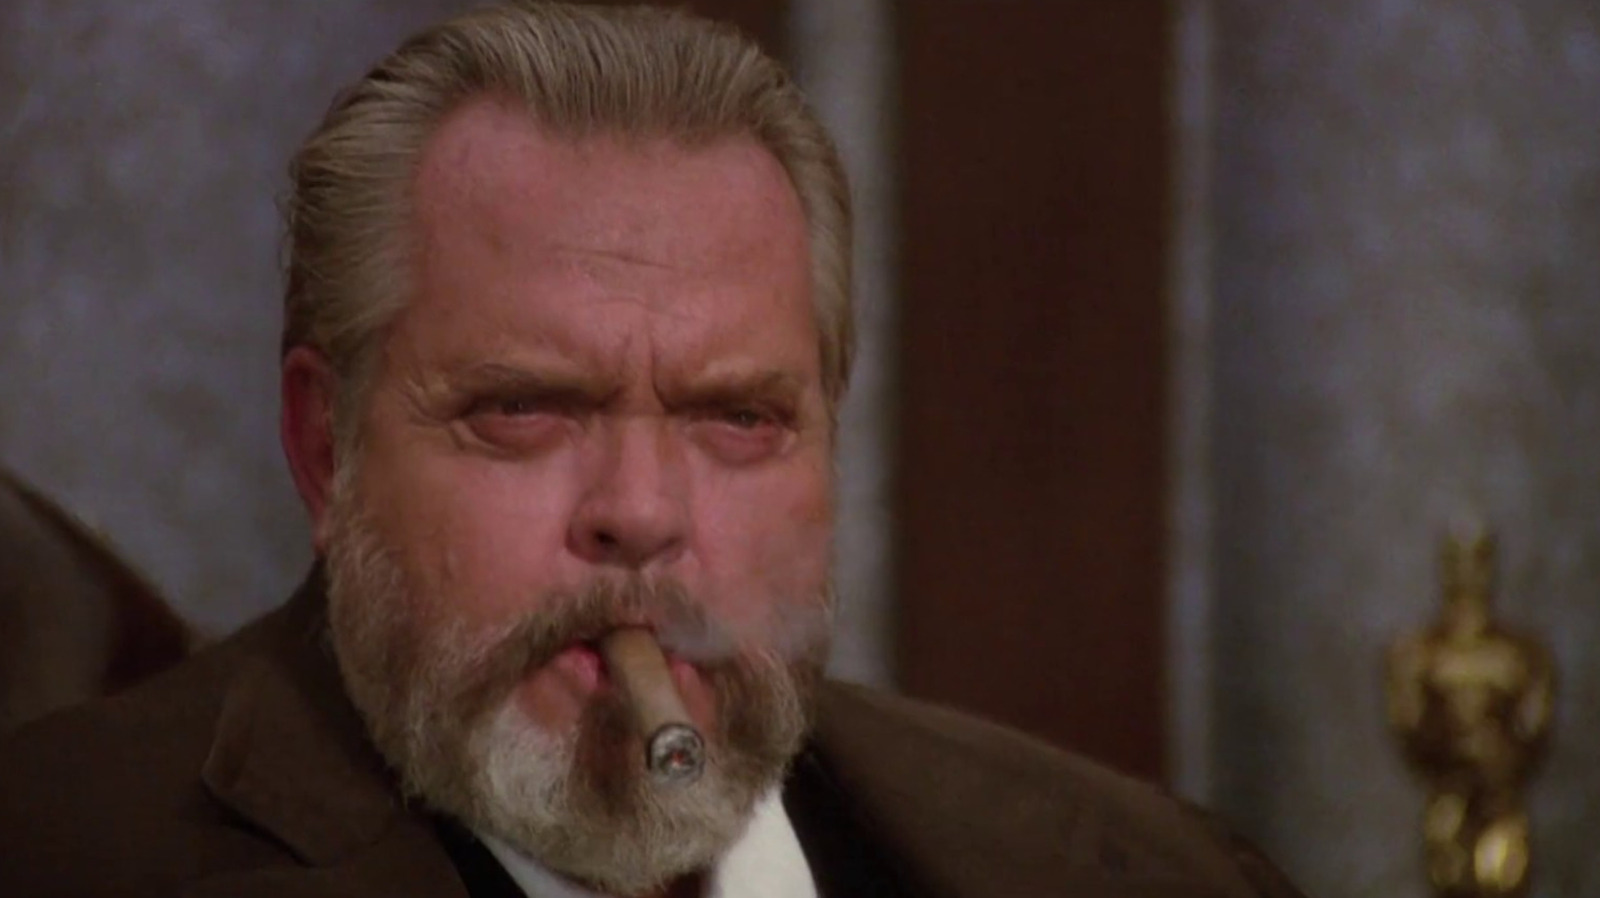 #Orson Welles’ Final Role Was Yet Another Under-Appreciated Film